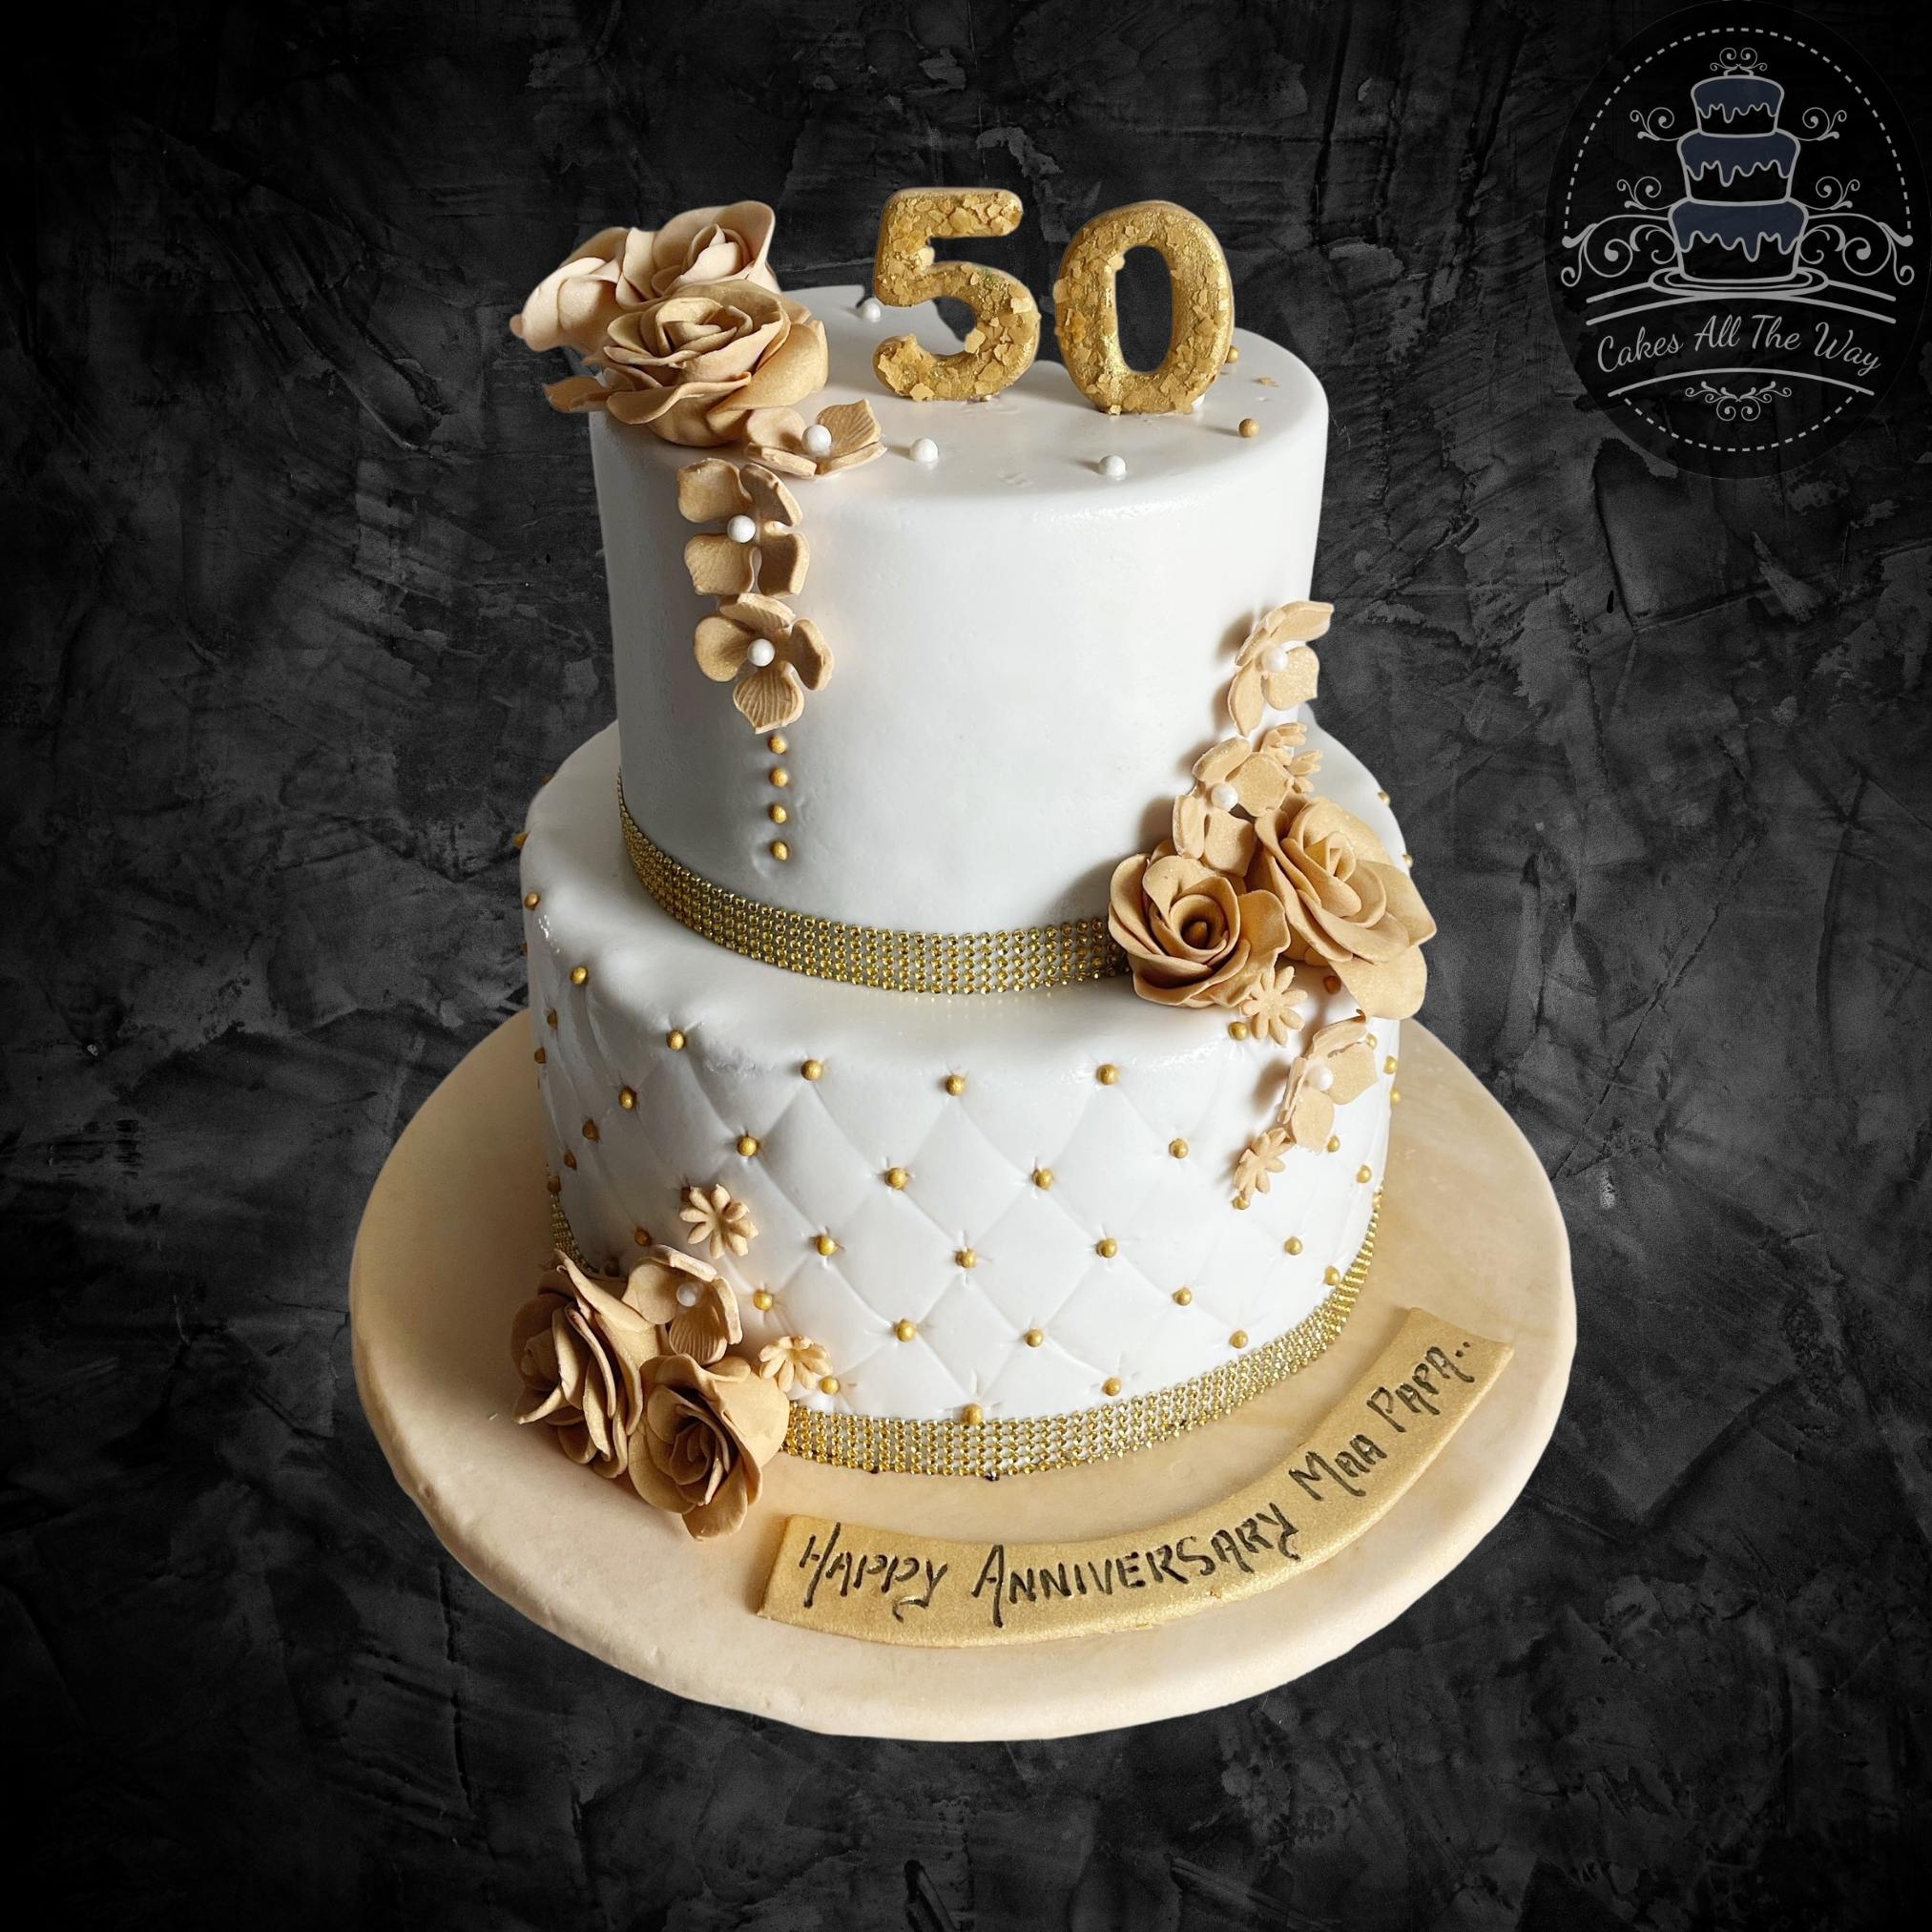 Pin by Jenna Booe on Cupcakes/Cakes | 60th anniversary cakes, Anniversary  cake, Wedding anniversary cakes